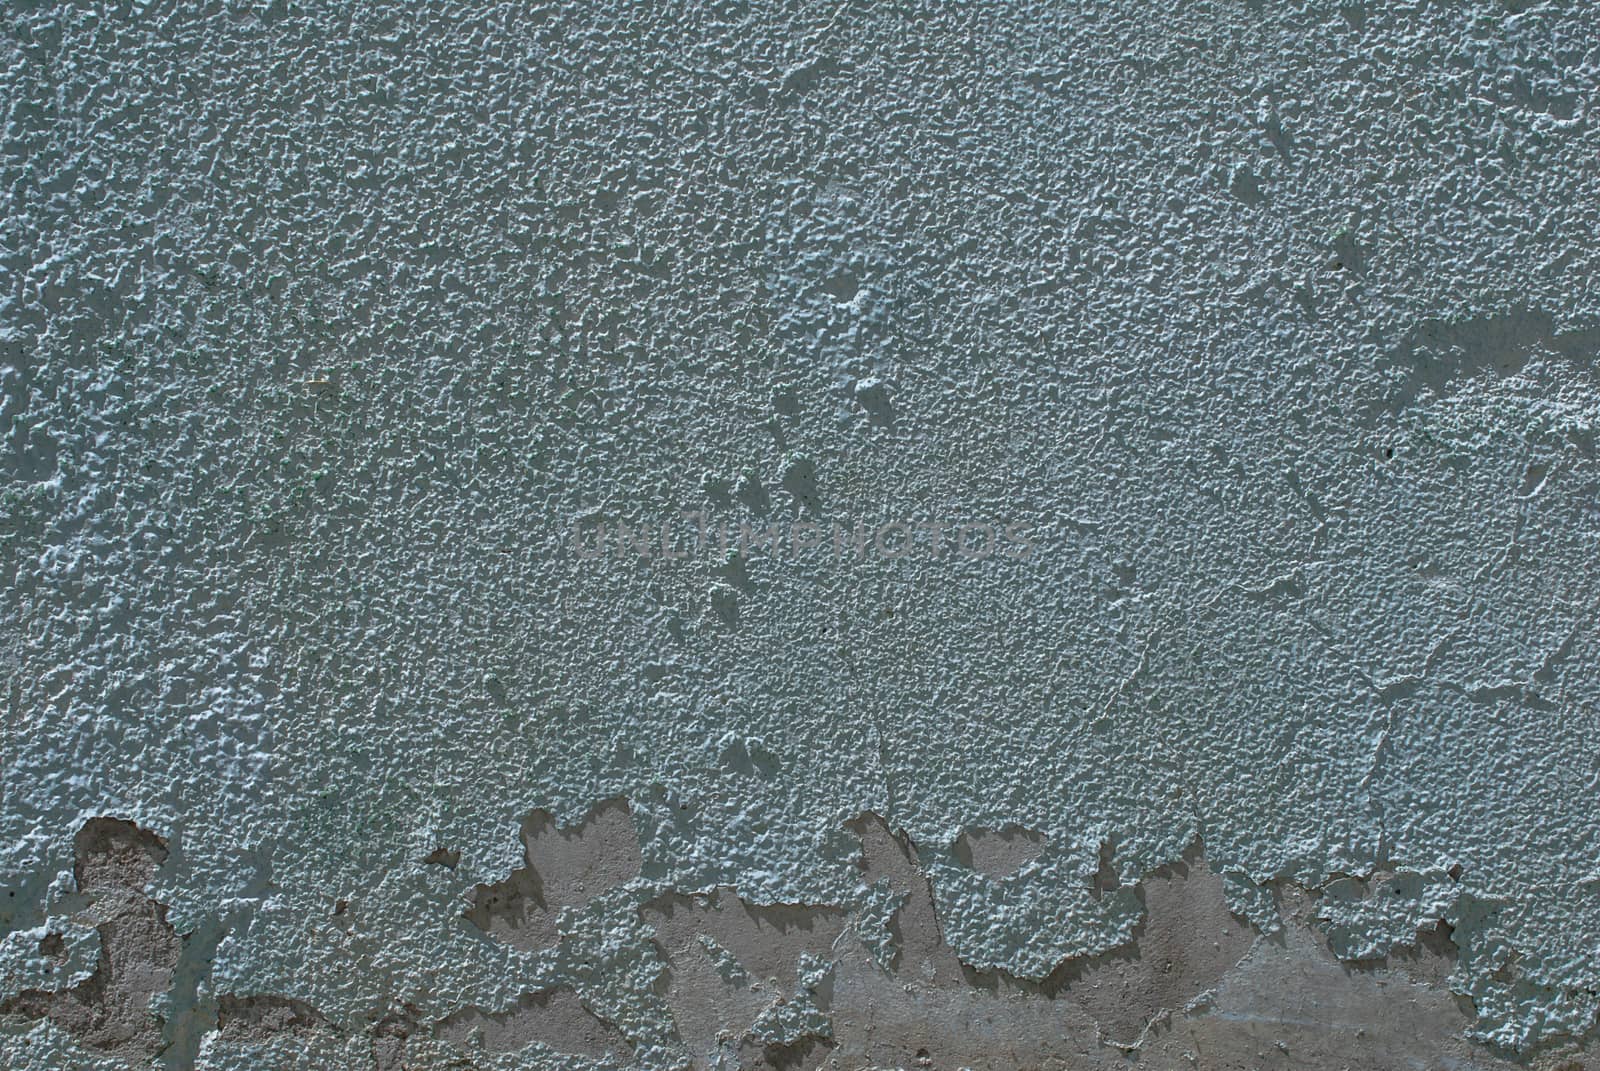 old chipped plaster on the concrete wall, landscape style, grunge concrete surface, great background or texture by uvisni